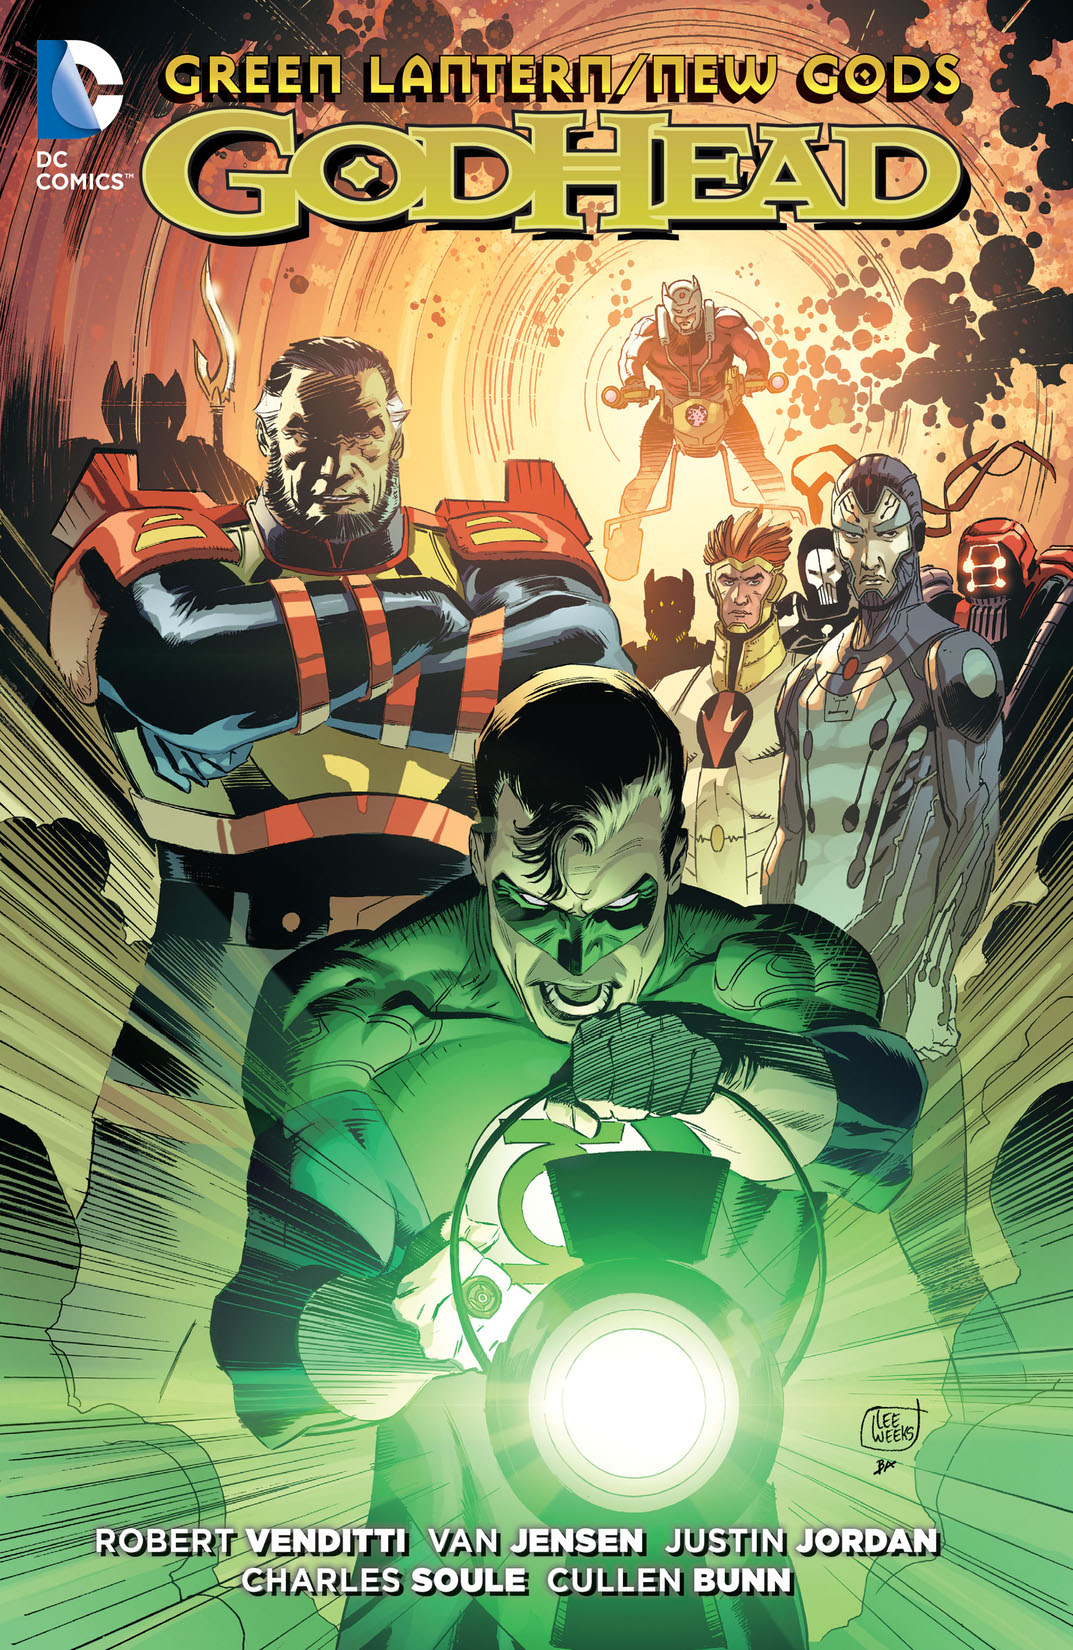 Green Lantern/New Gods: Godhead preview images